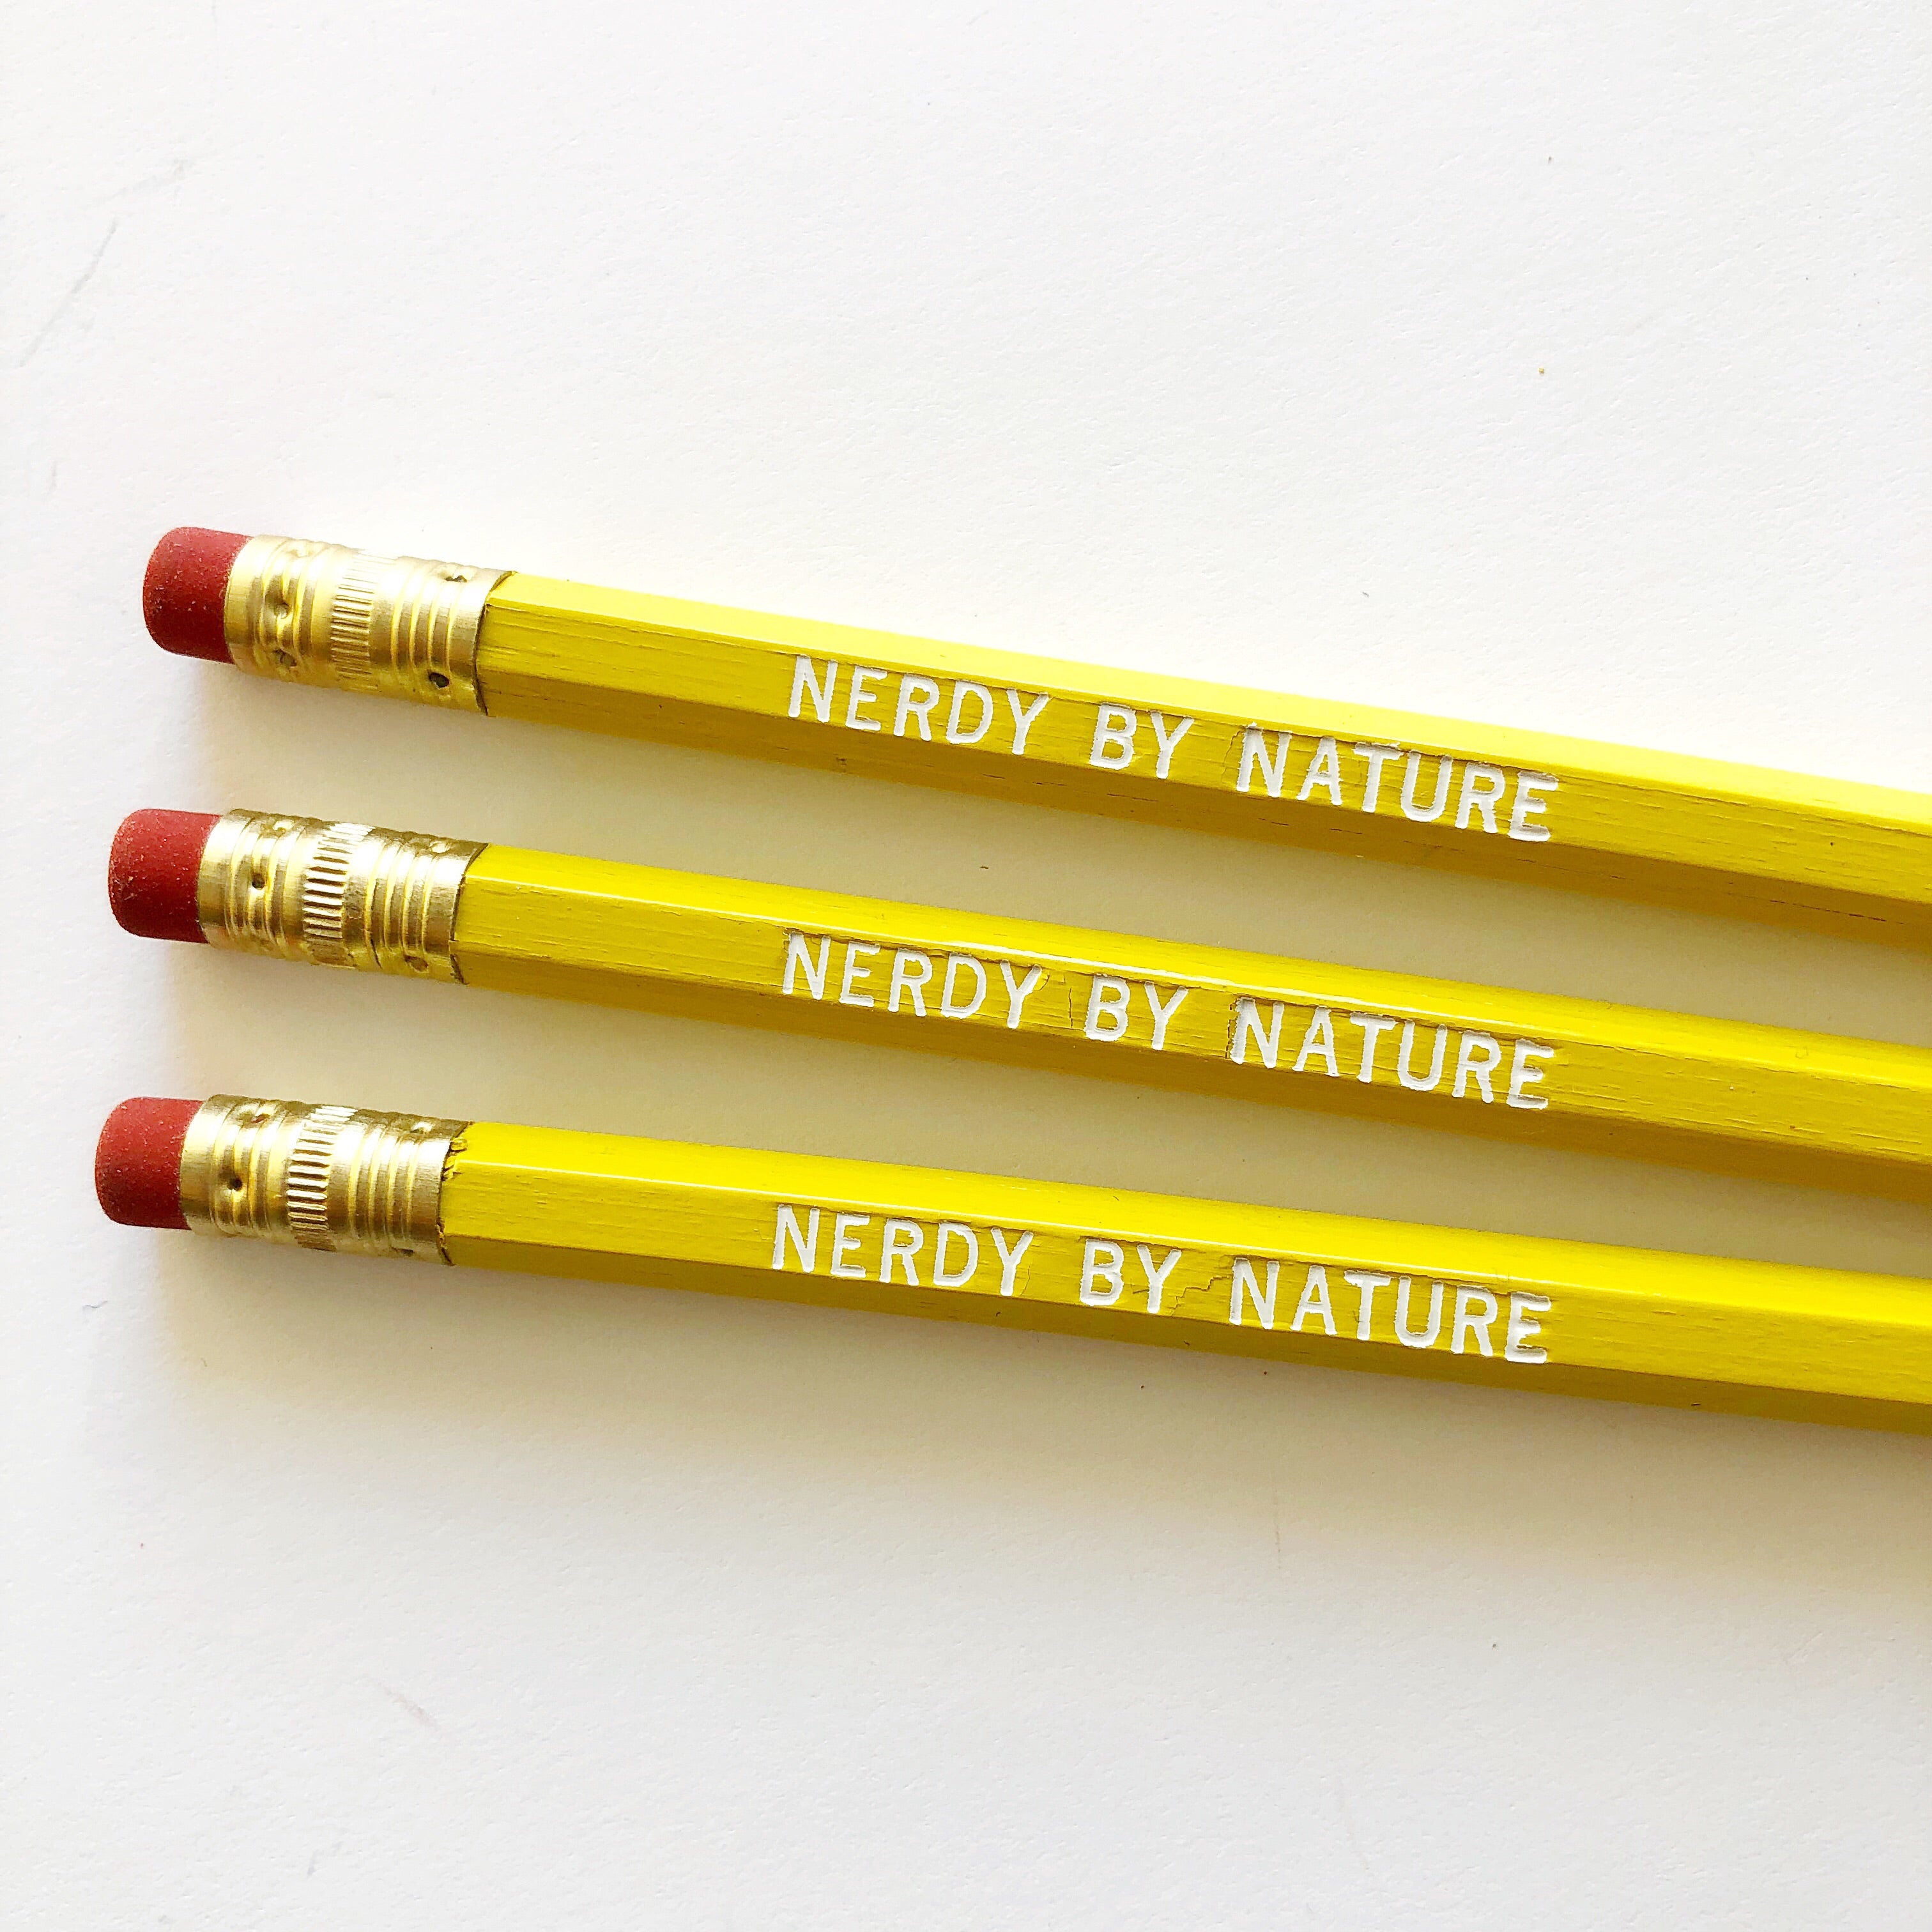 Nerdy By Nature Pencil